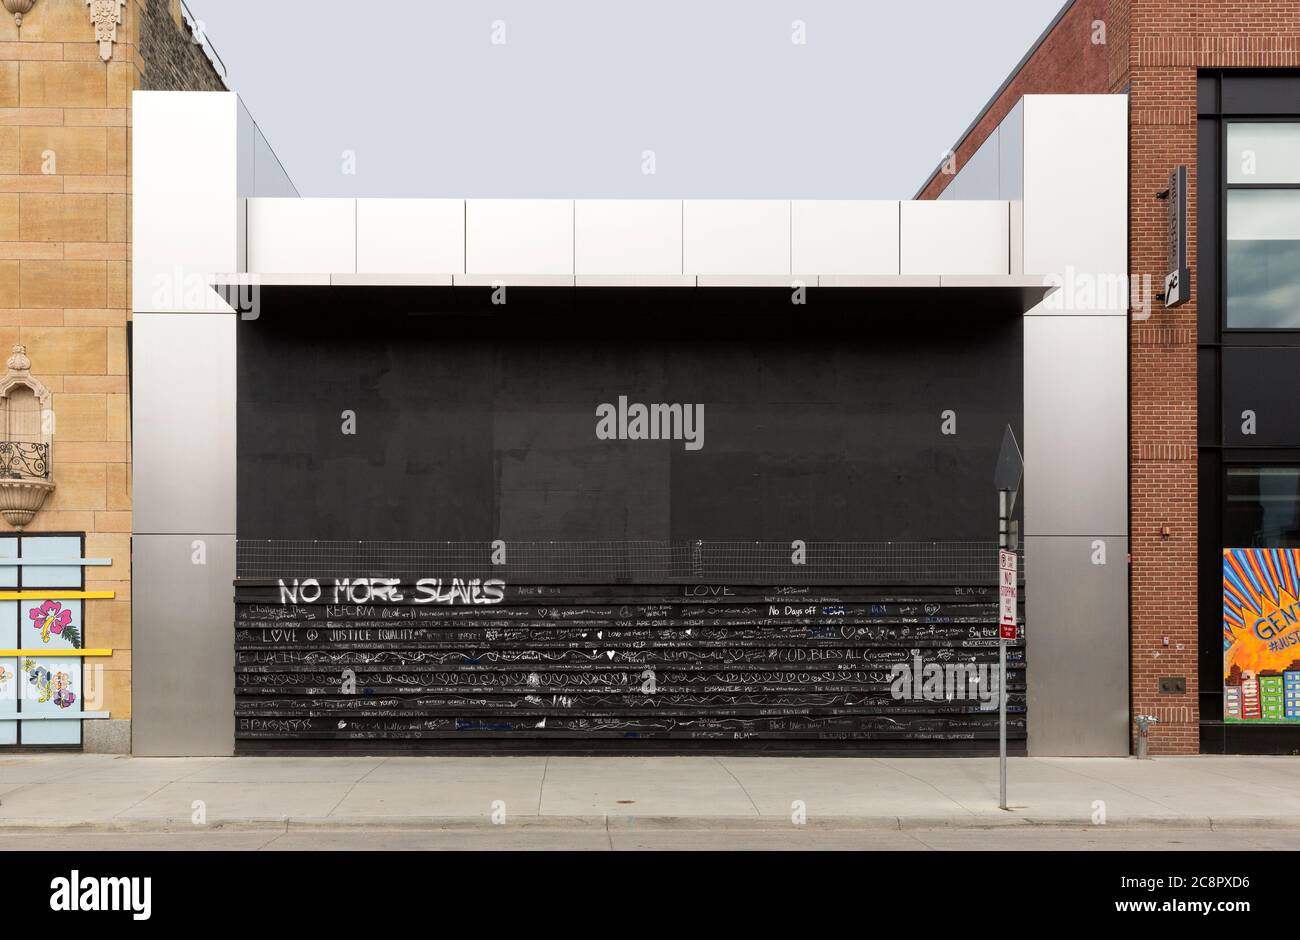 The boarded up exterior of the Apple Store  due to social protests in Uptown on Hennepin Avenue  in Minneapolis, Minnesota.  NO MORE SLAVES written in Stock Photo